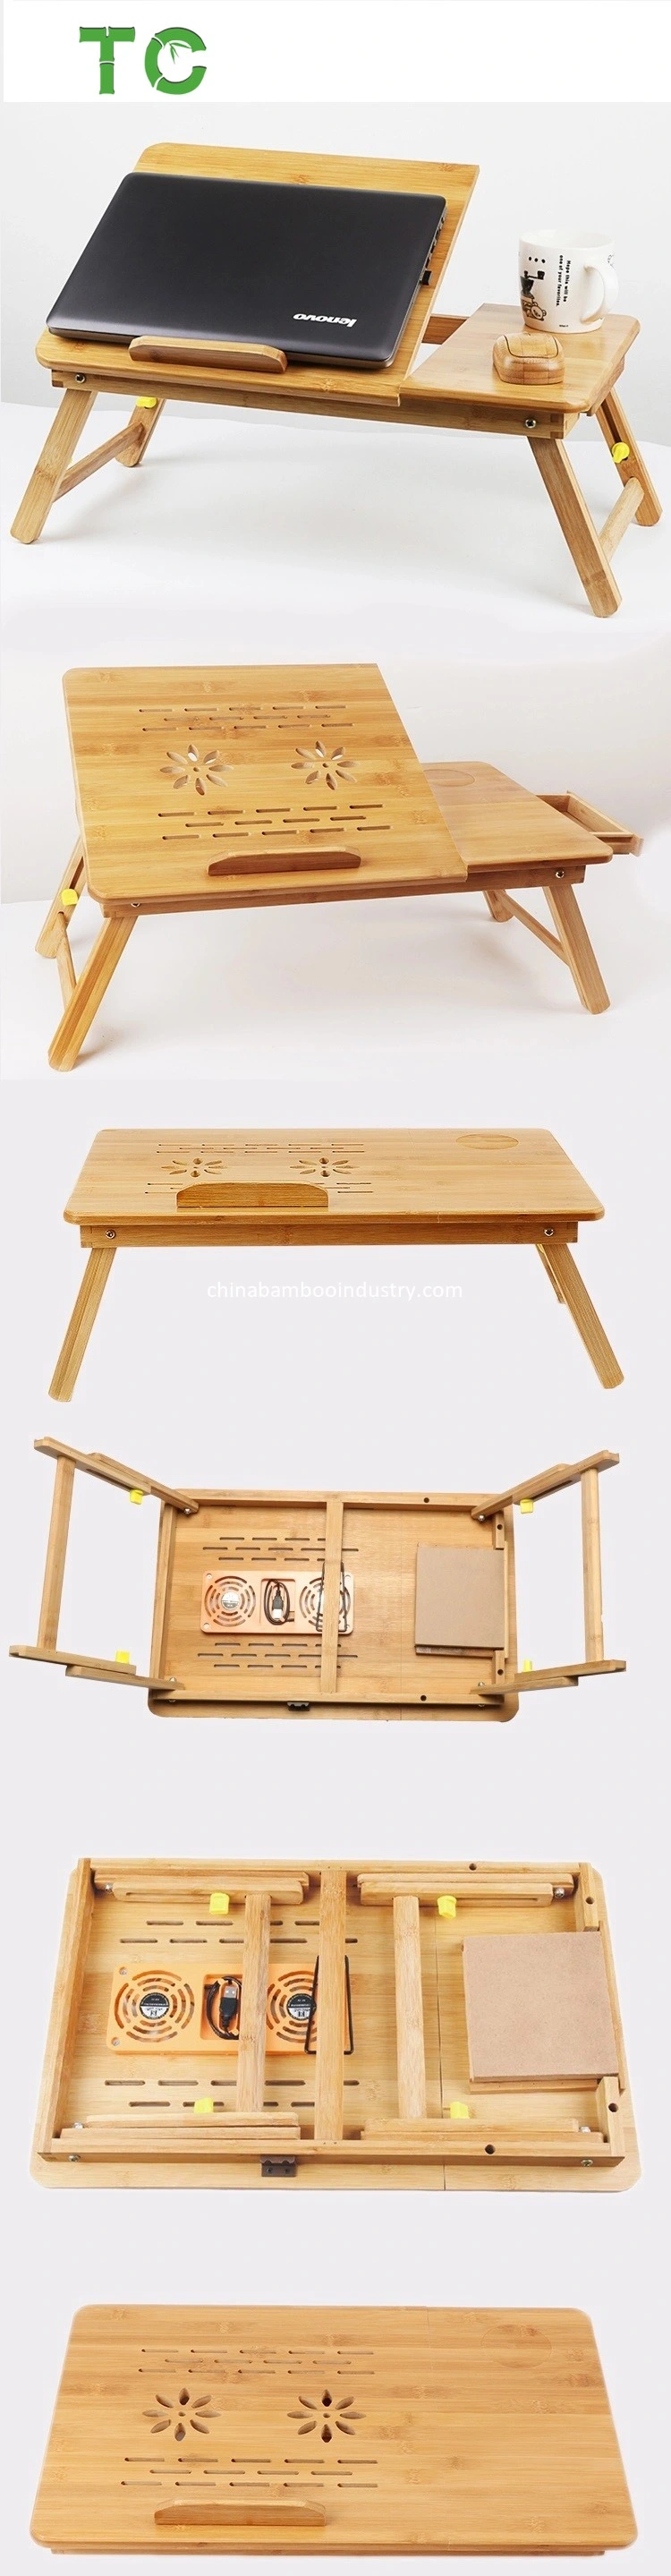 Customized Laptop Table Adjustable & Foldable Laptop Desk with Flip Top and Drawer